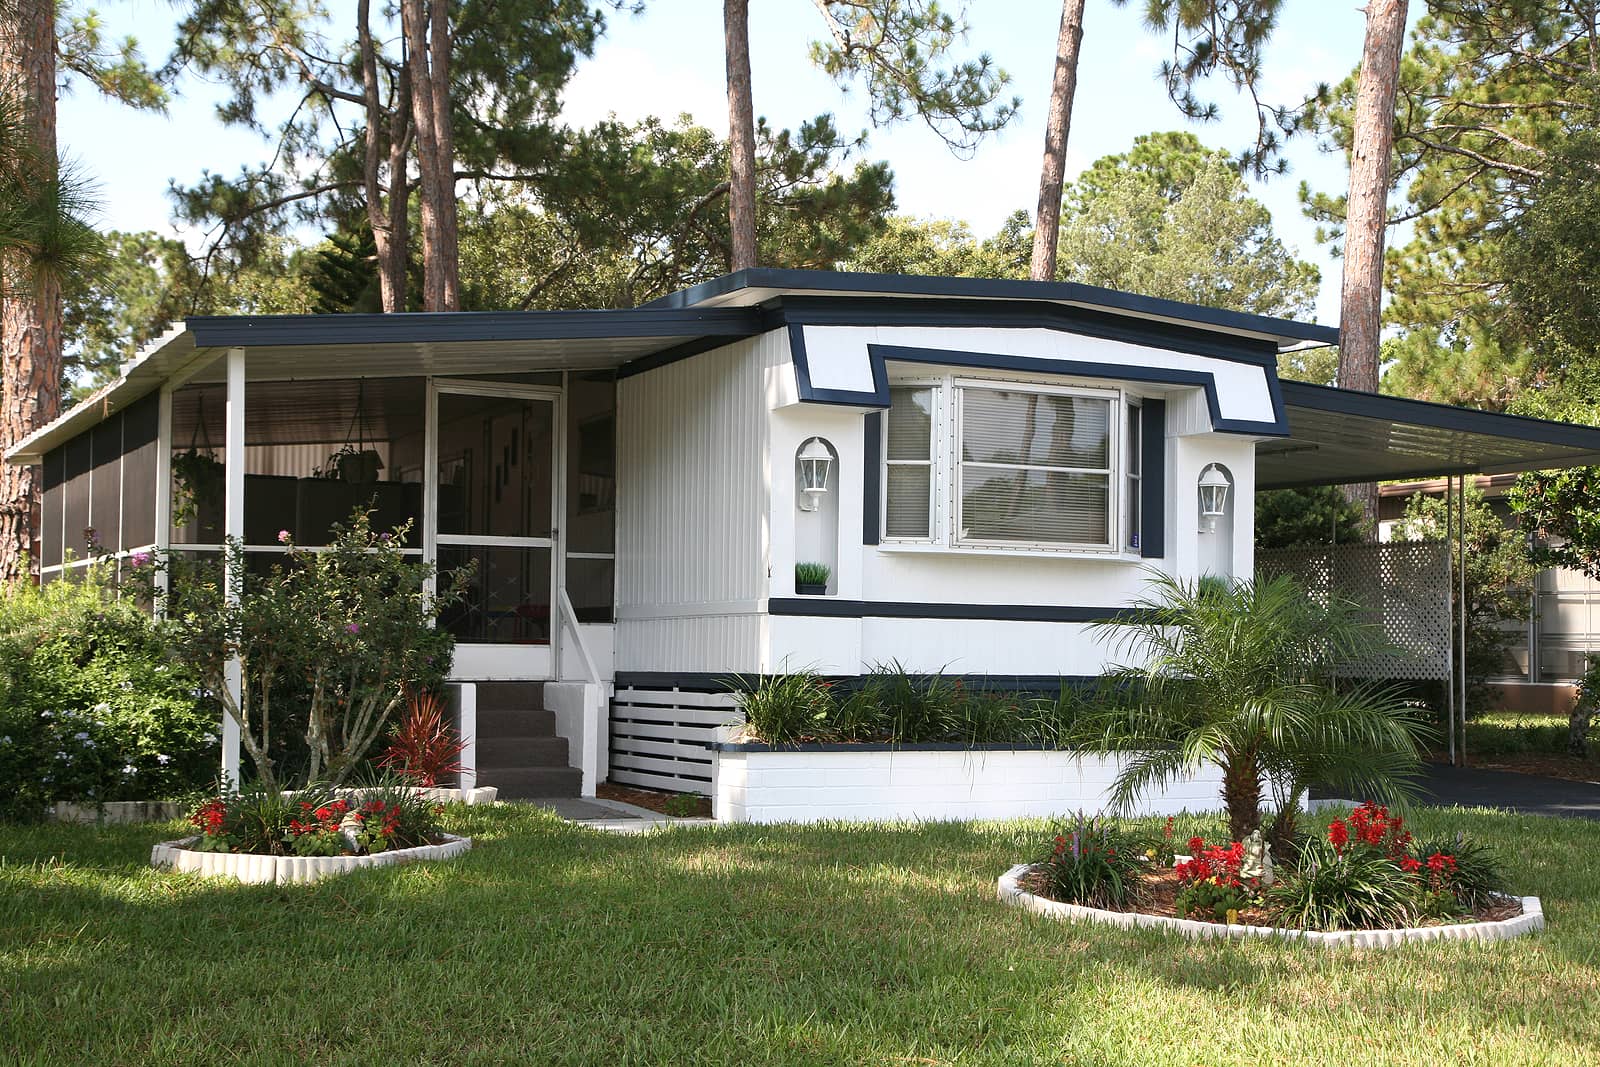 How to Negotiate for Mobile Home using Blue Book Value on Mobile Homes